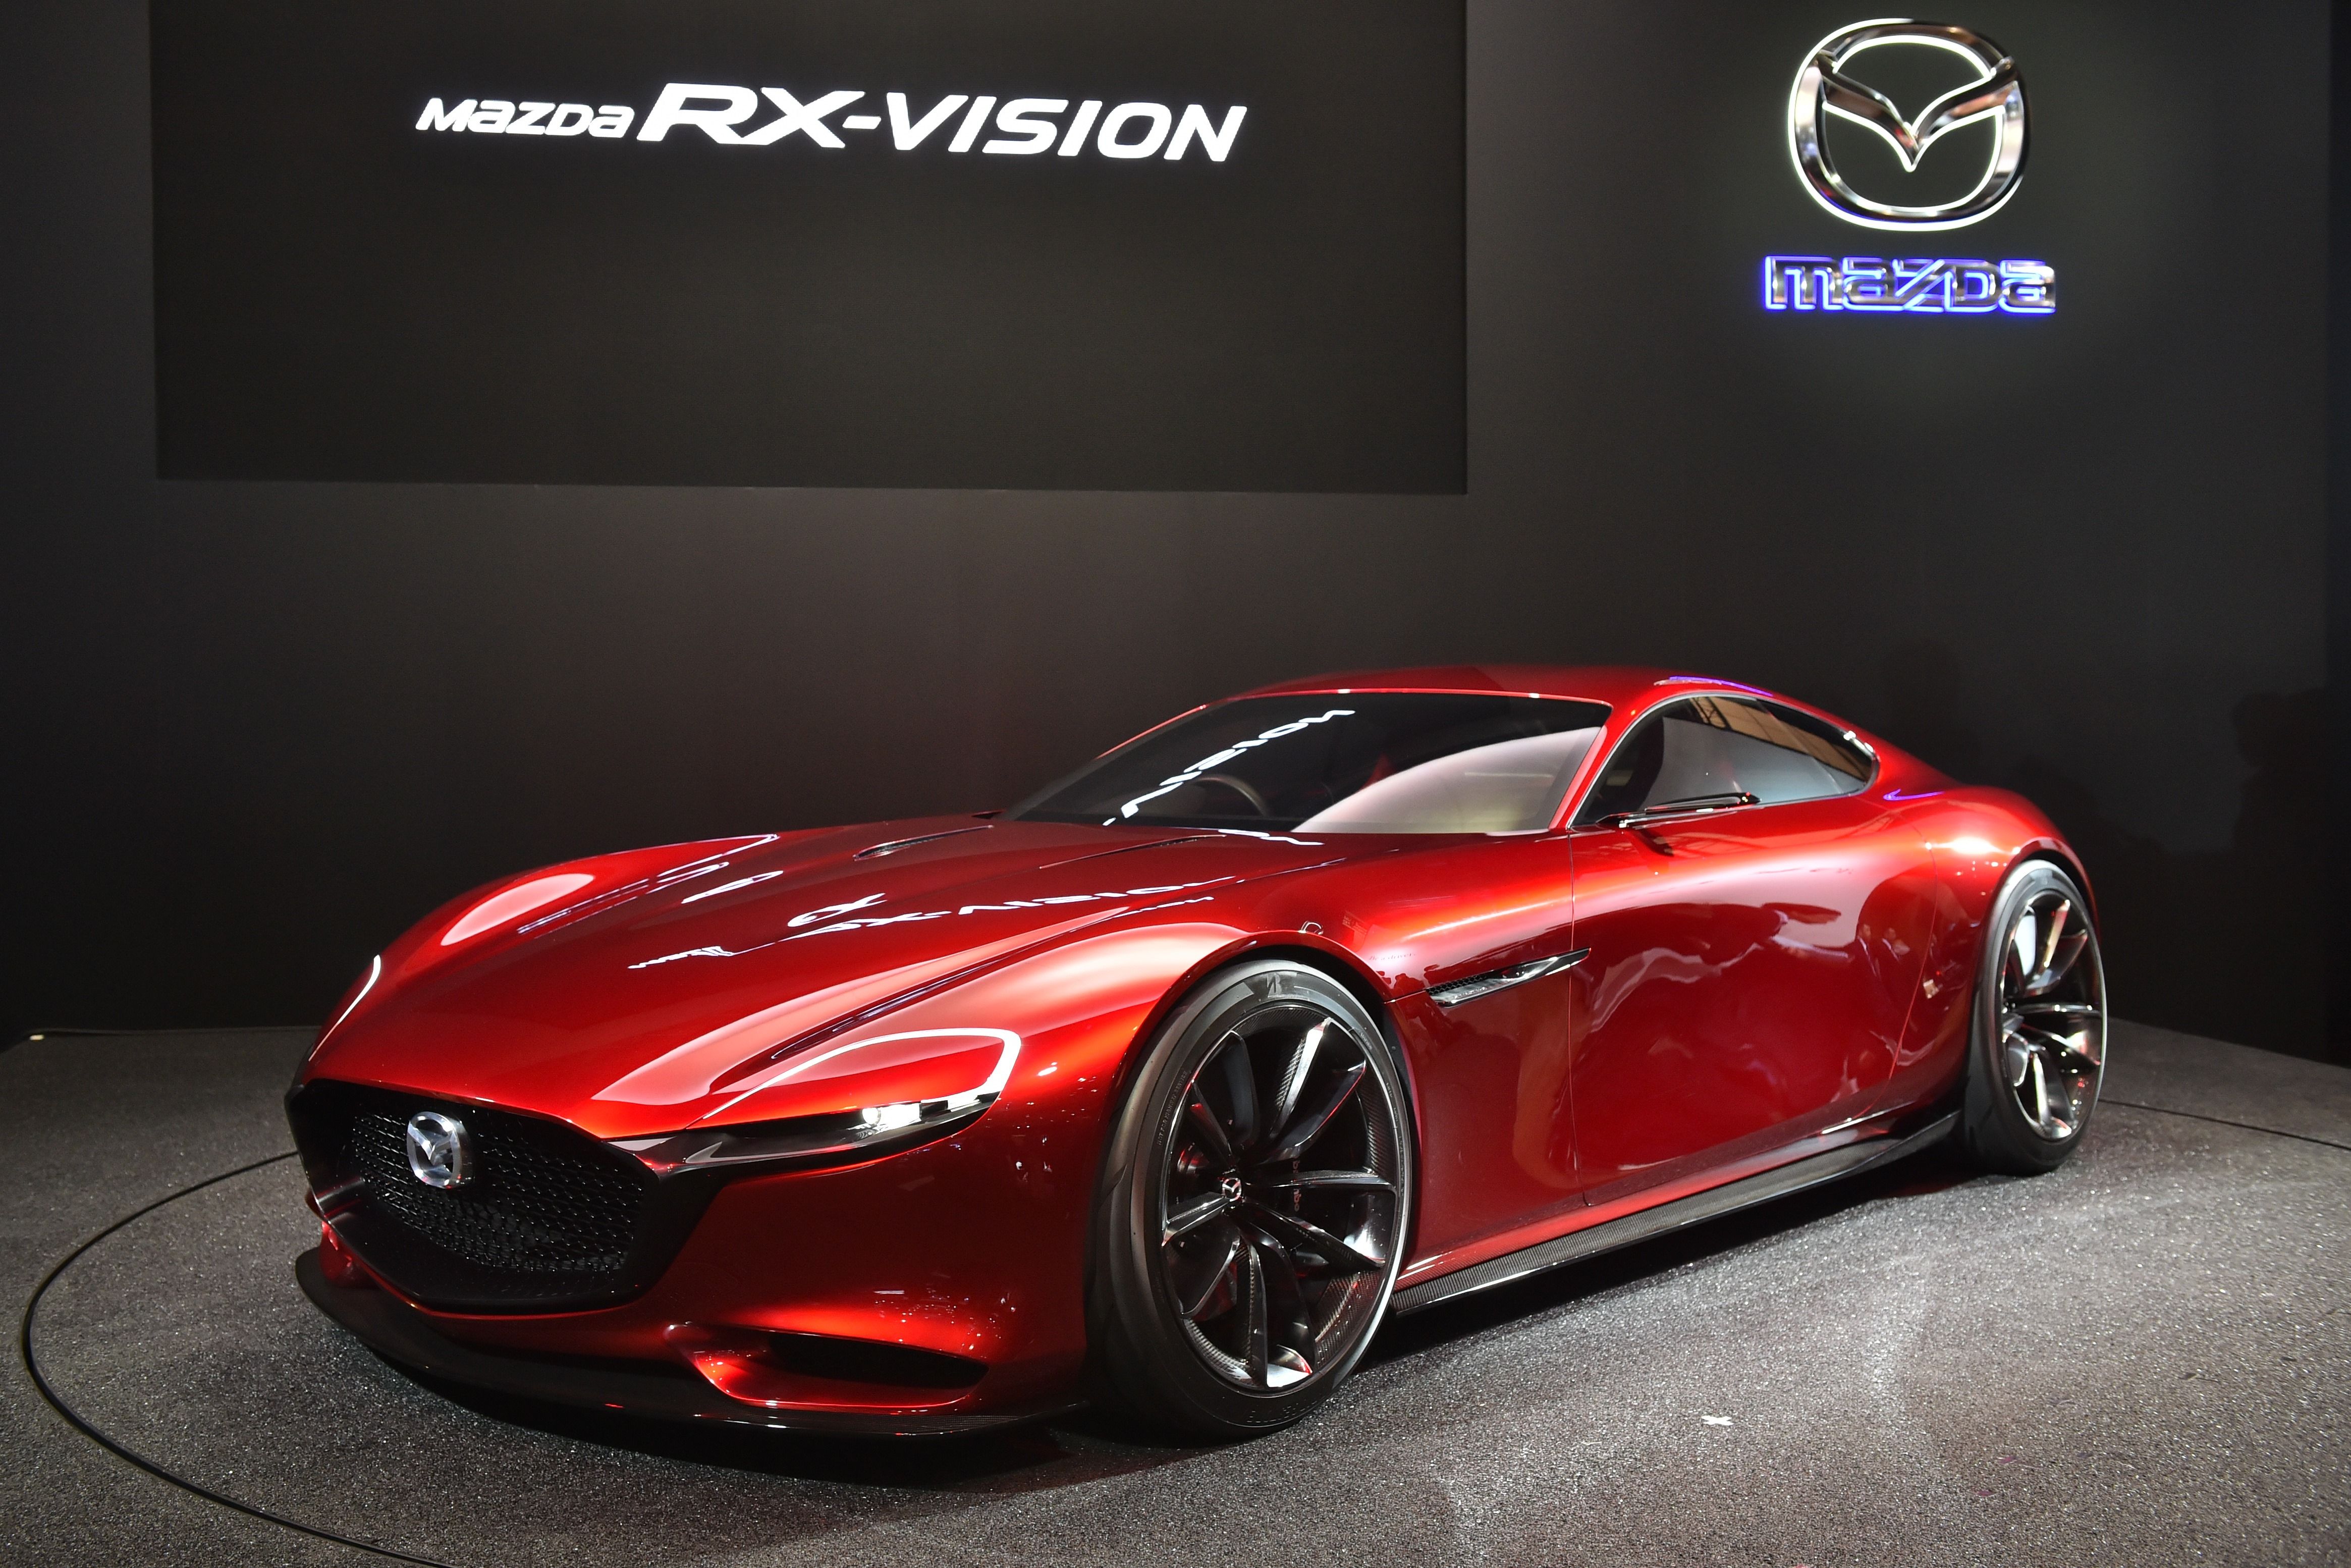 The RX-7 Vision Concept